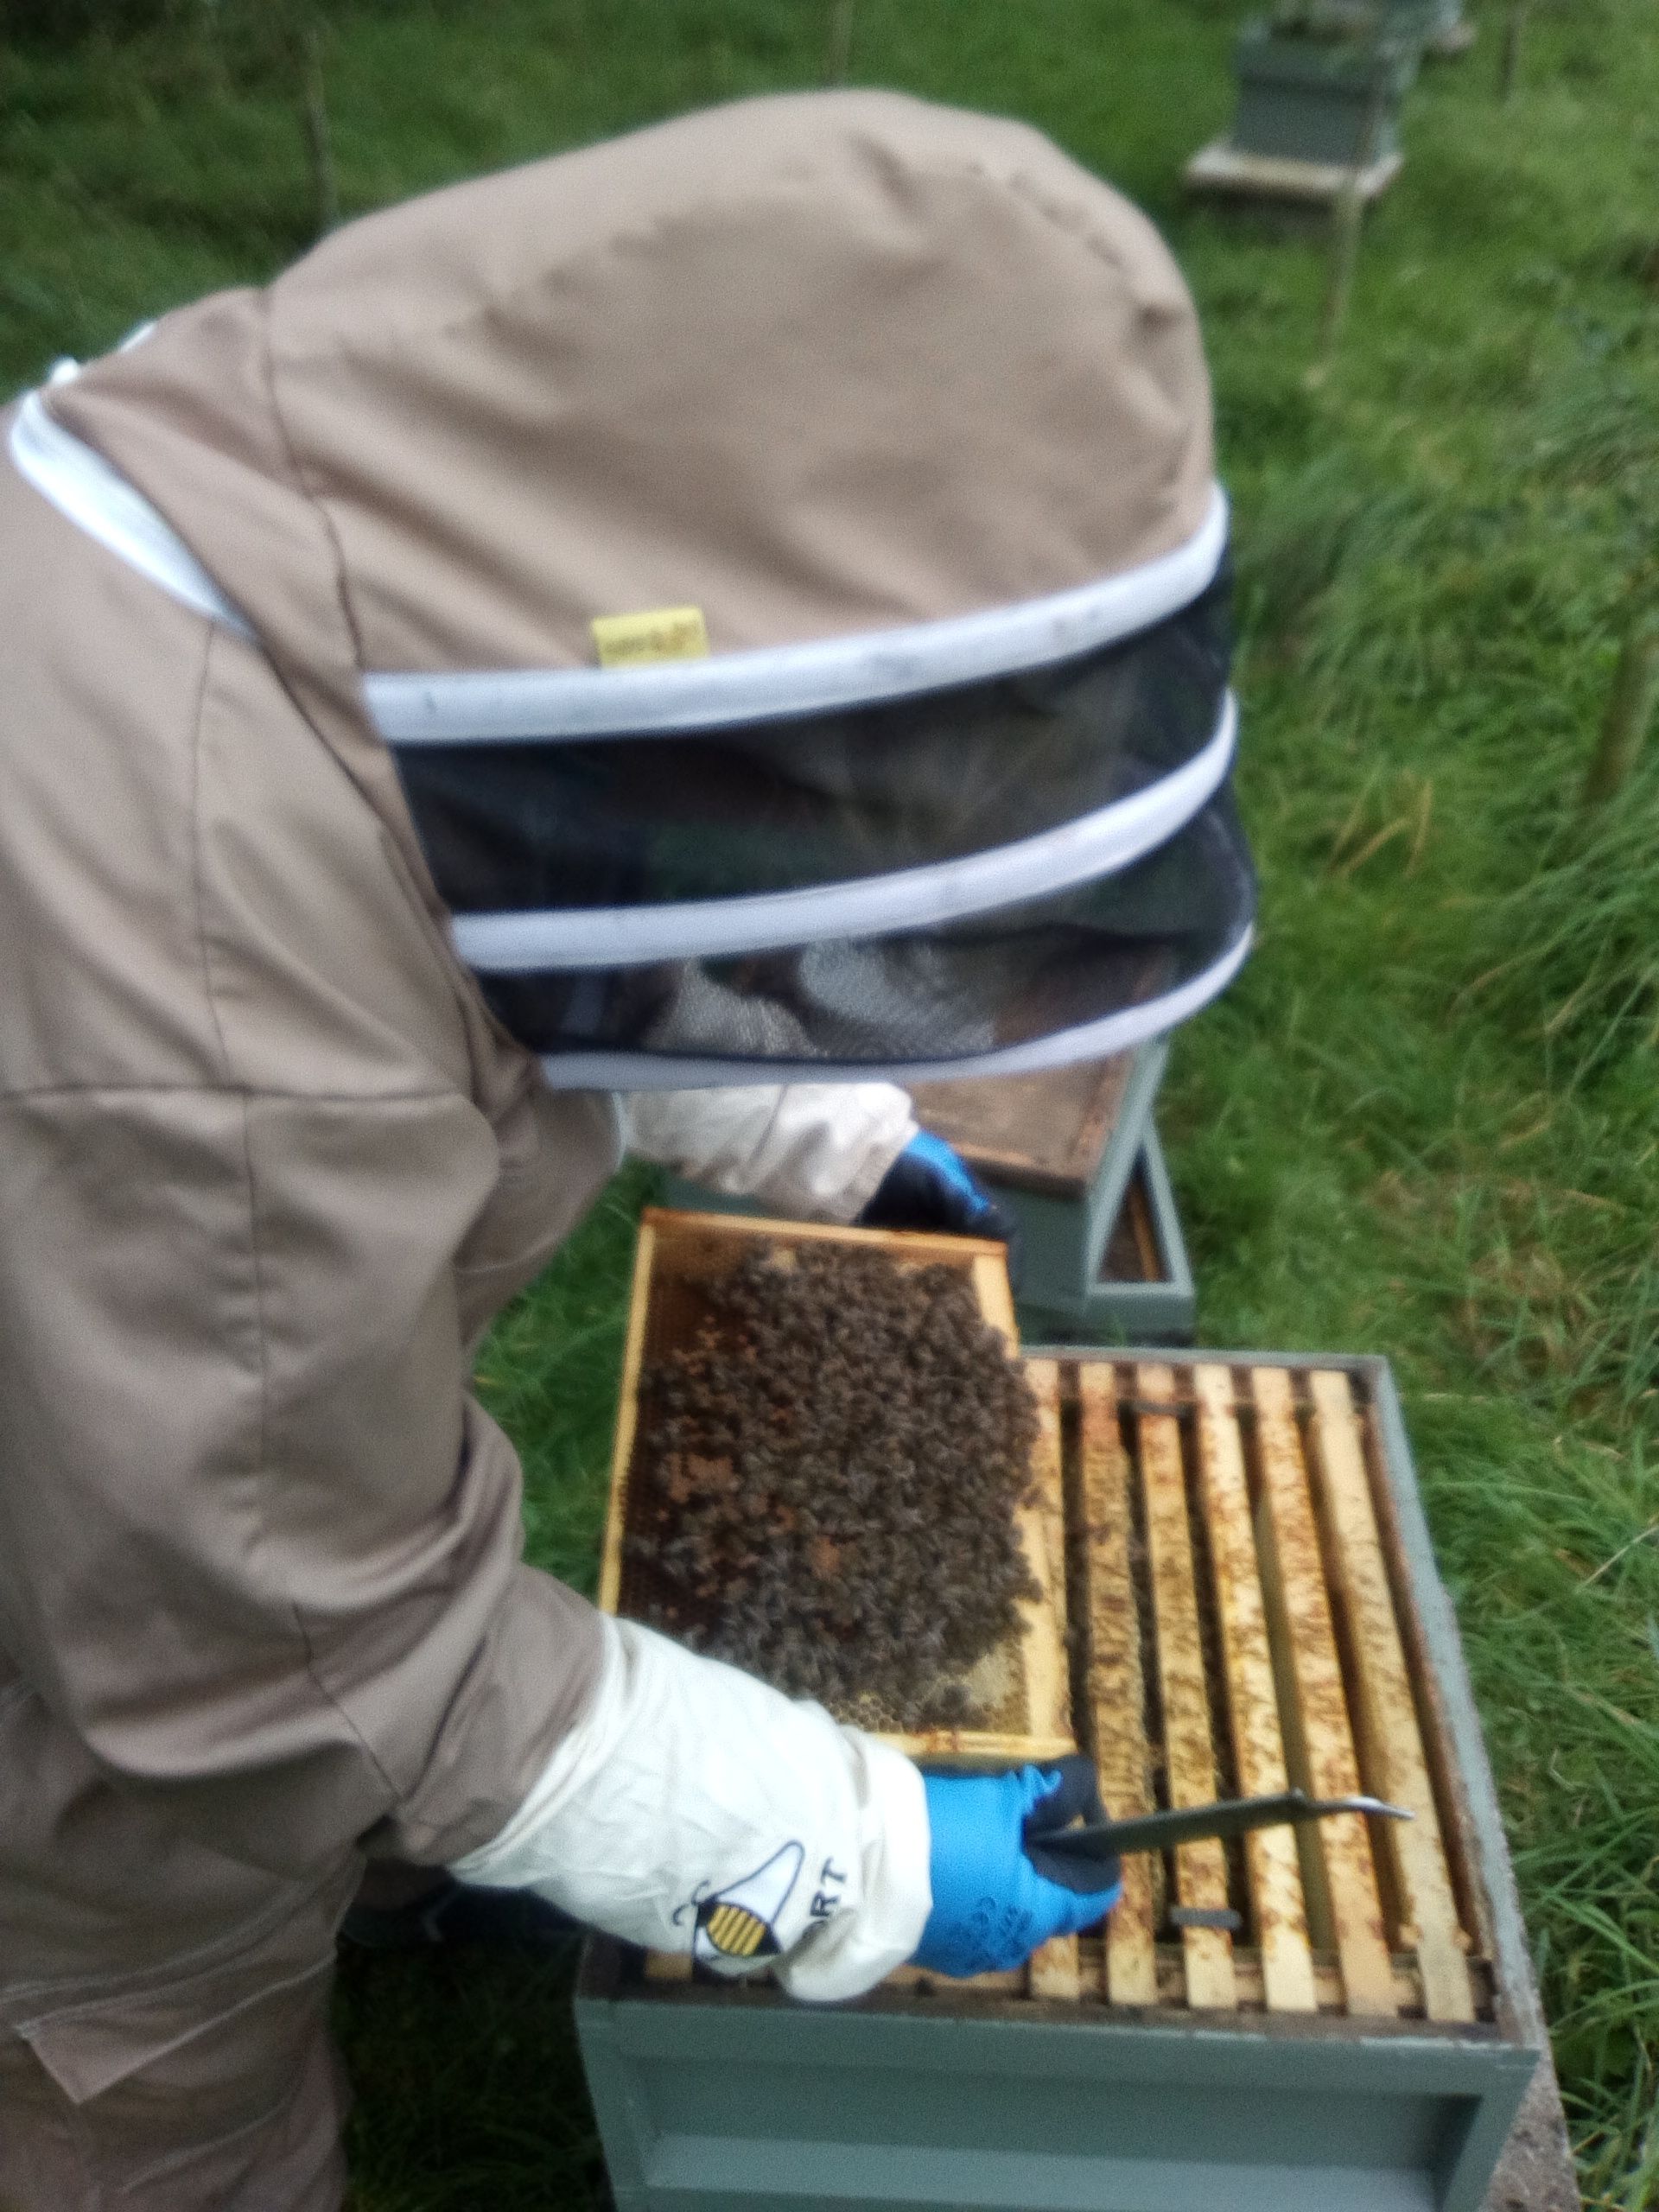 first hand experience of handling bees